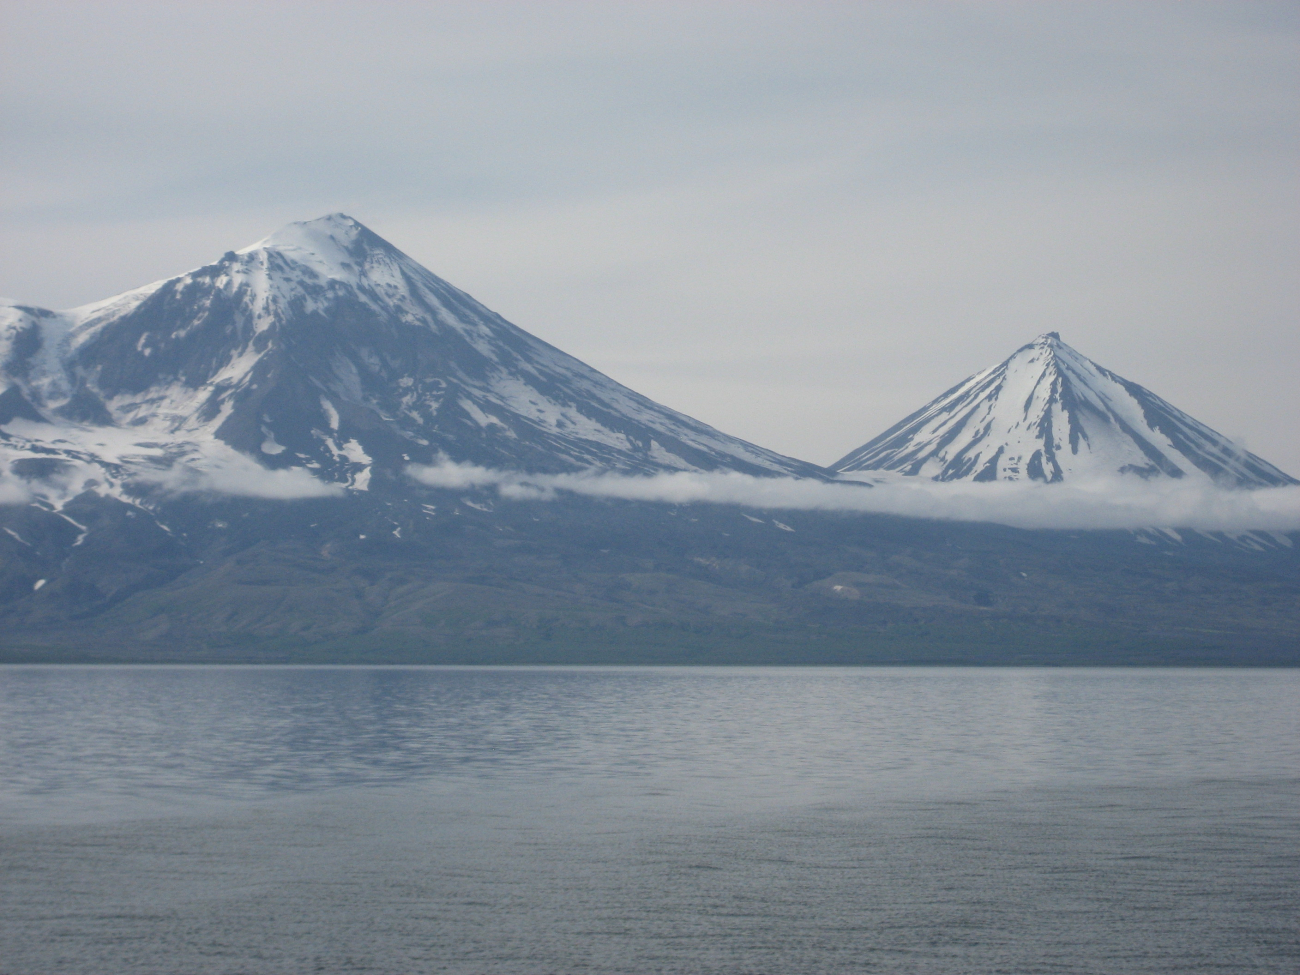 Pavlof Volcano on left and Pavlof Sister as seen from the southeast